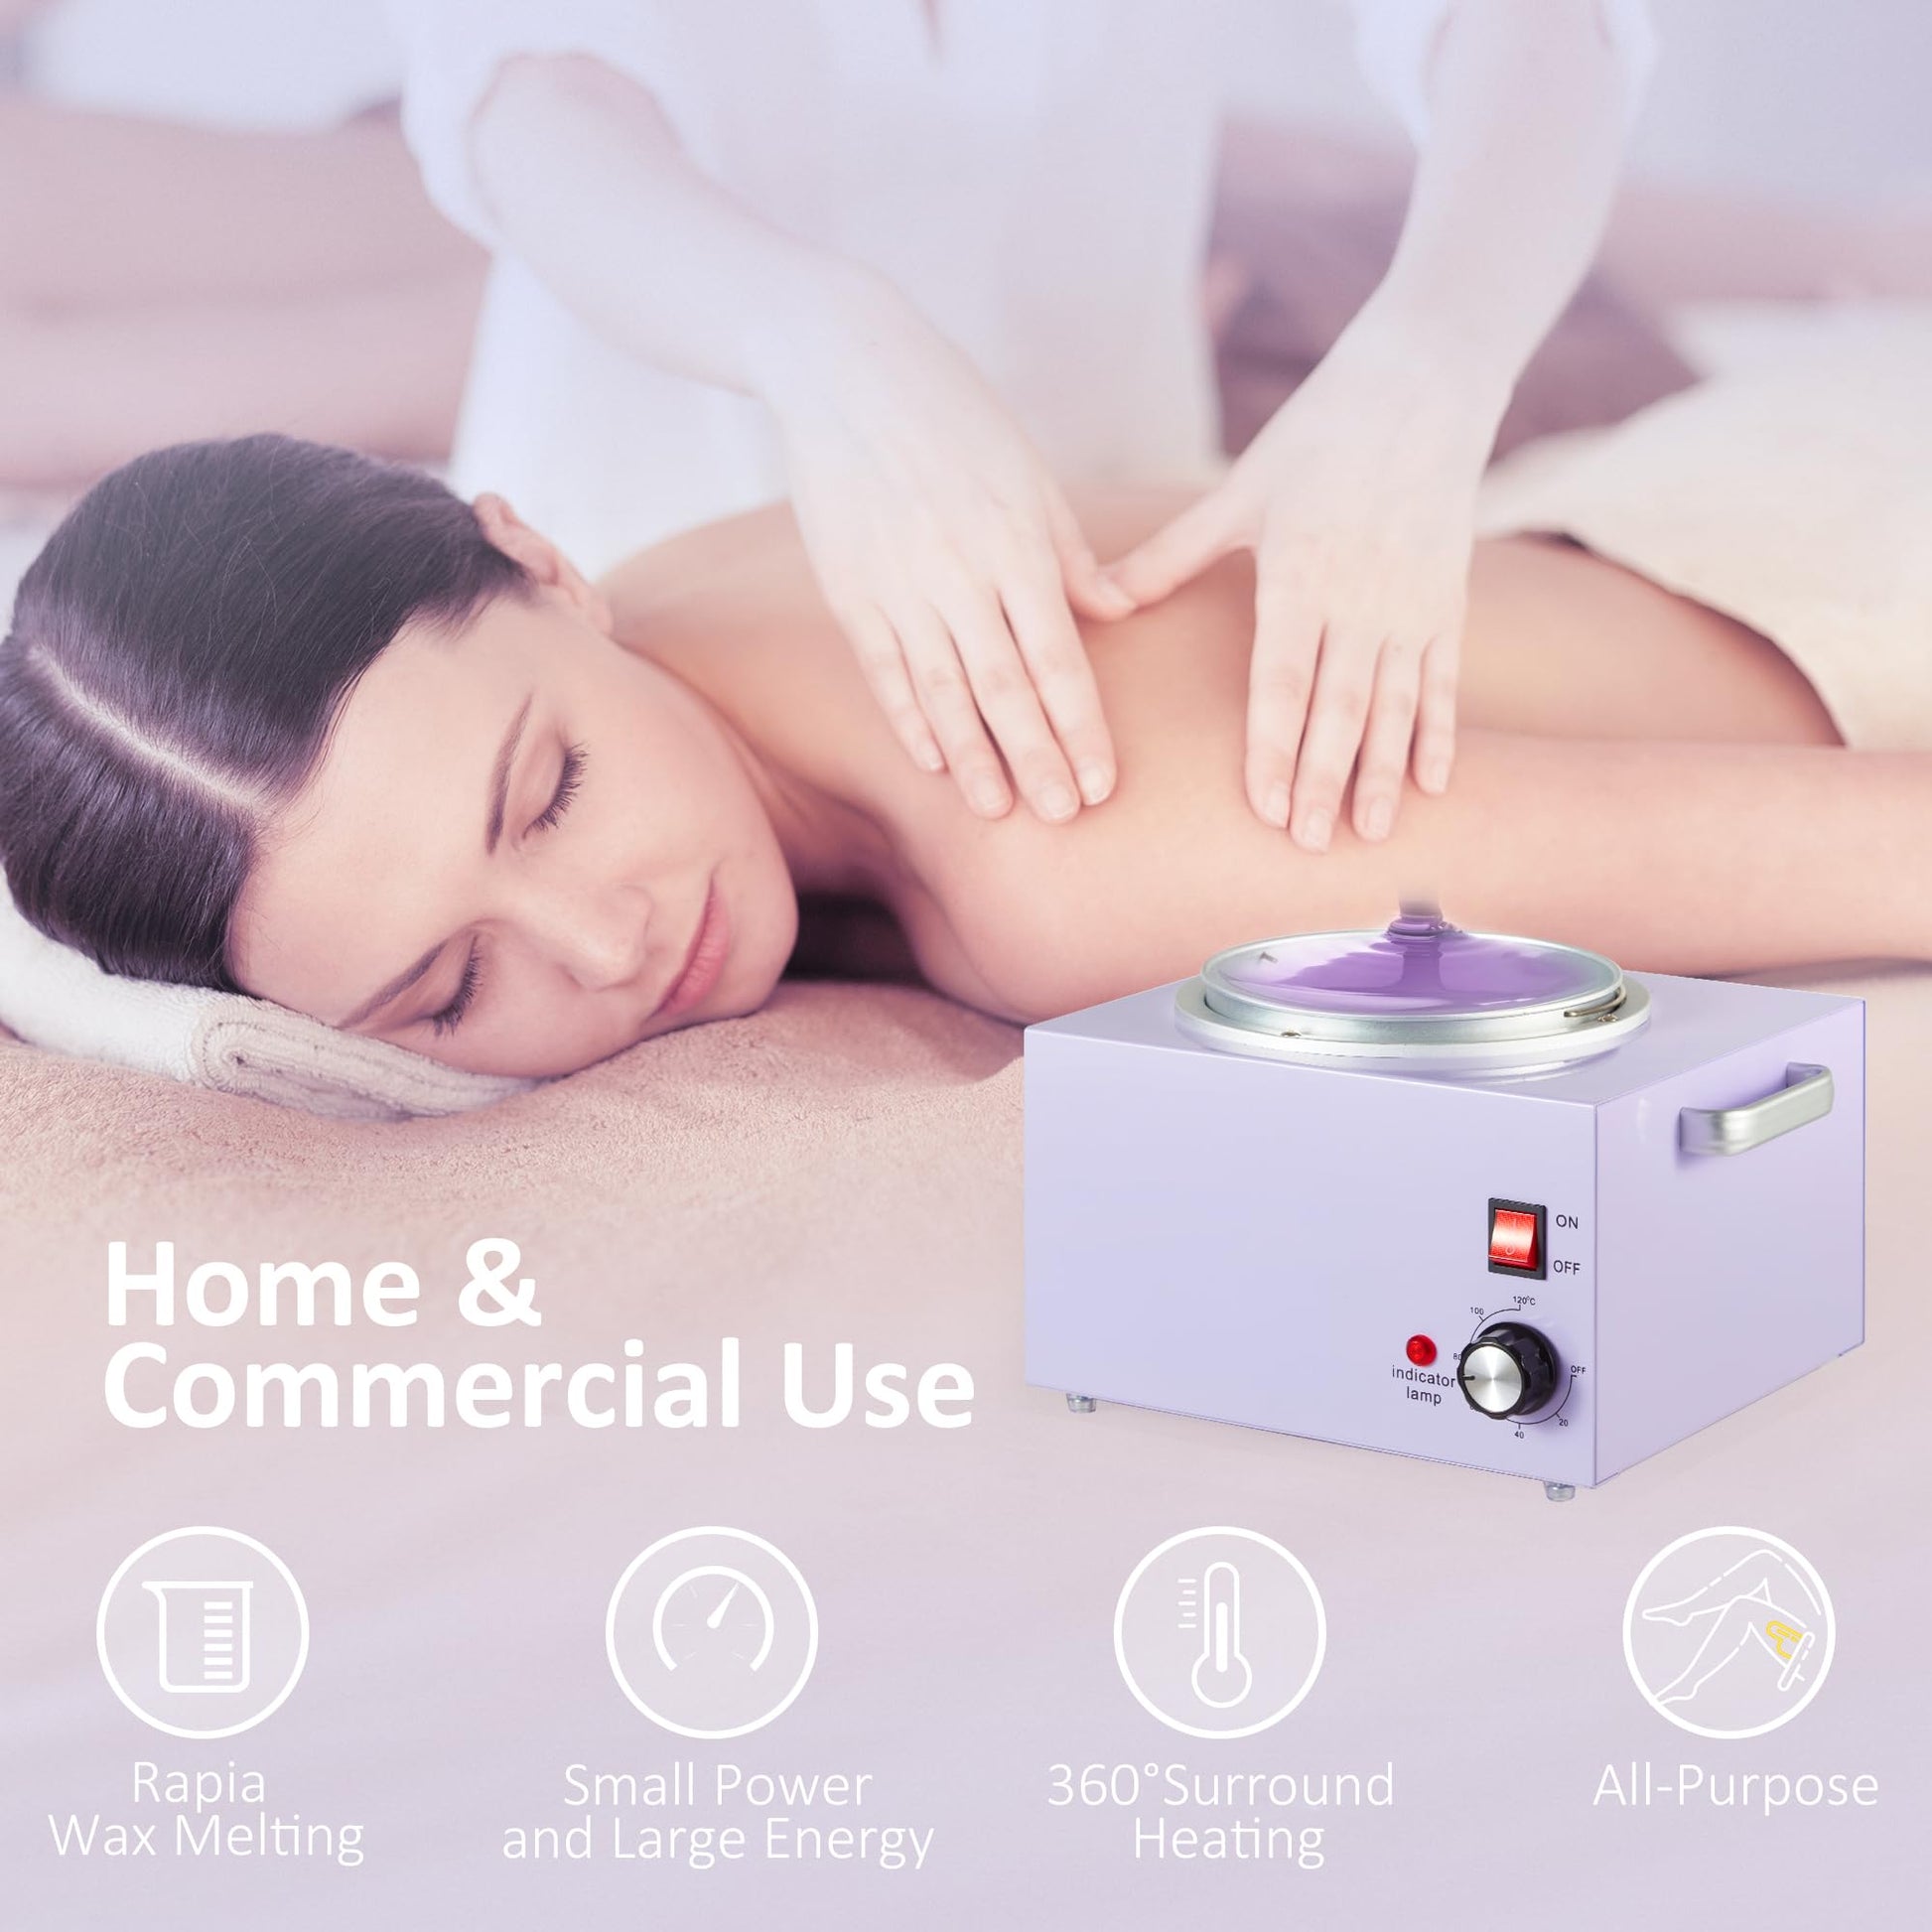 3L Quick Melt Wax Warmer Professional for Hair Removal in 15Min